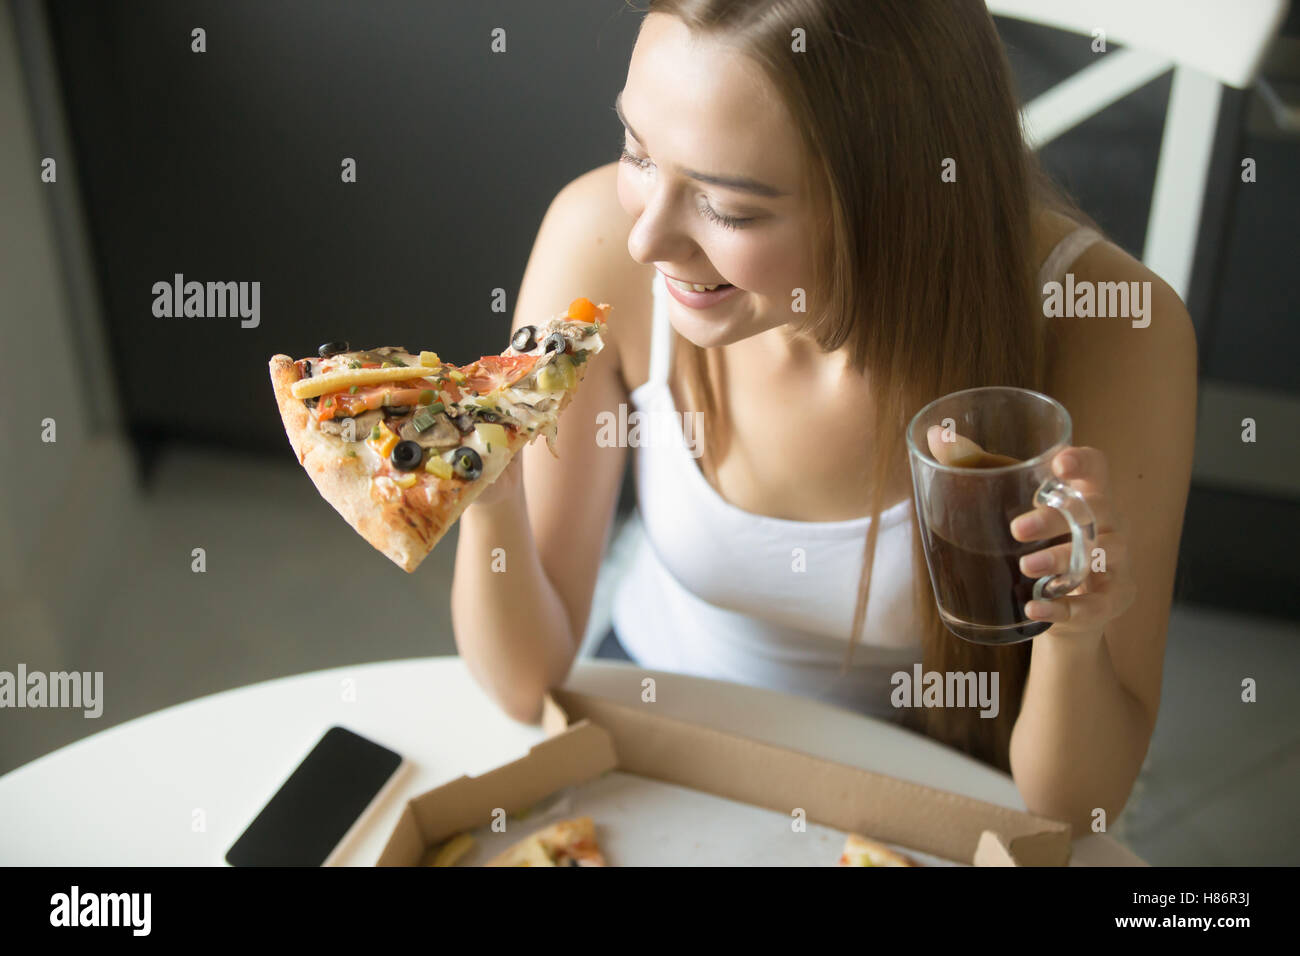 Young smiling girl with a slice of pizza Stock Photo